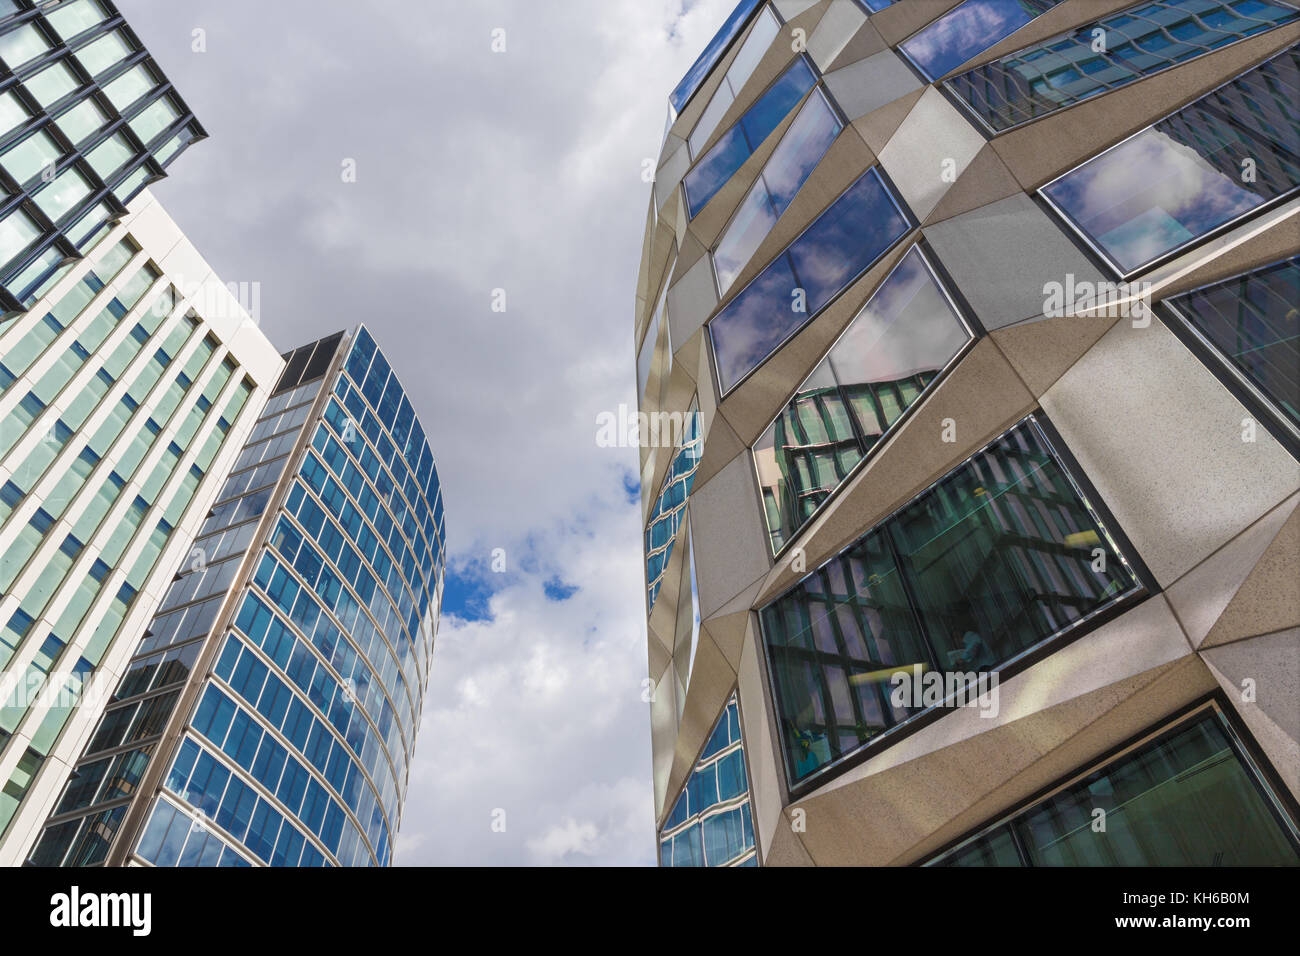 London - The modern facades from center of the city. Stock Photo